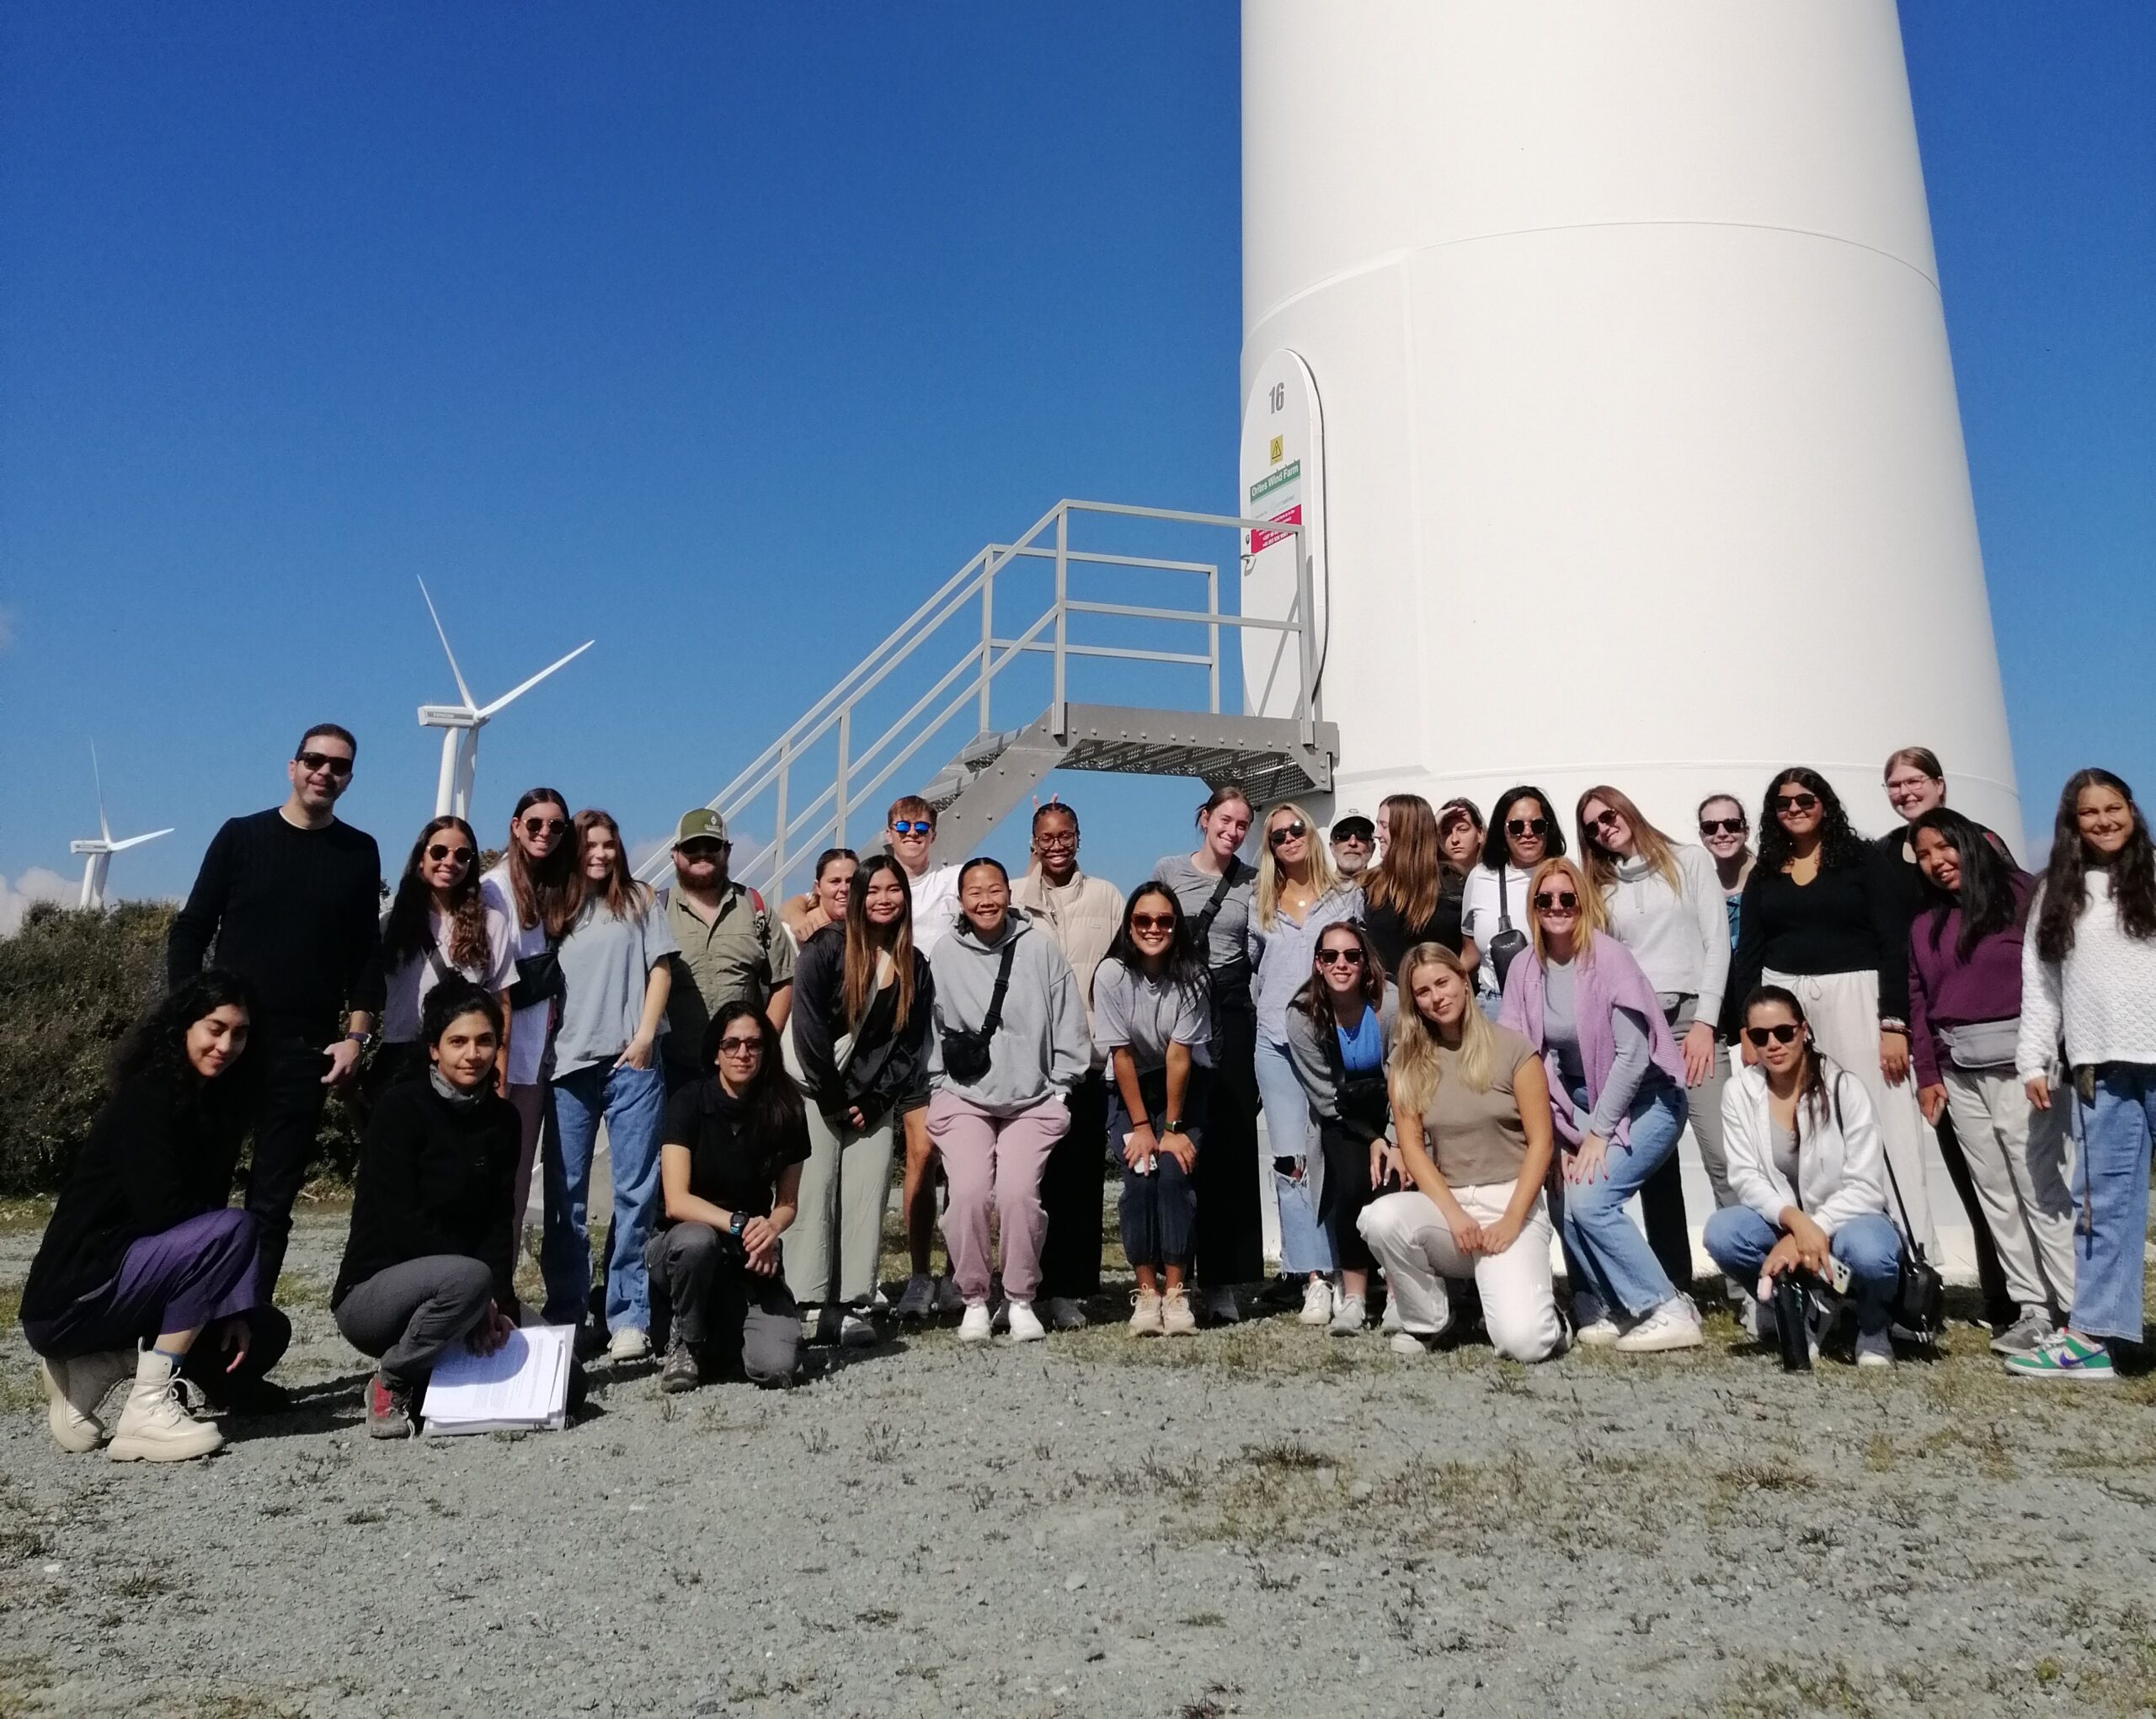 The multi-country study abroad program “Semester at Sea” visited Cyprus for an educational field trip